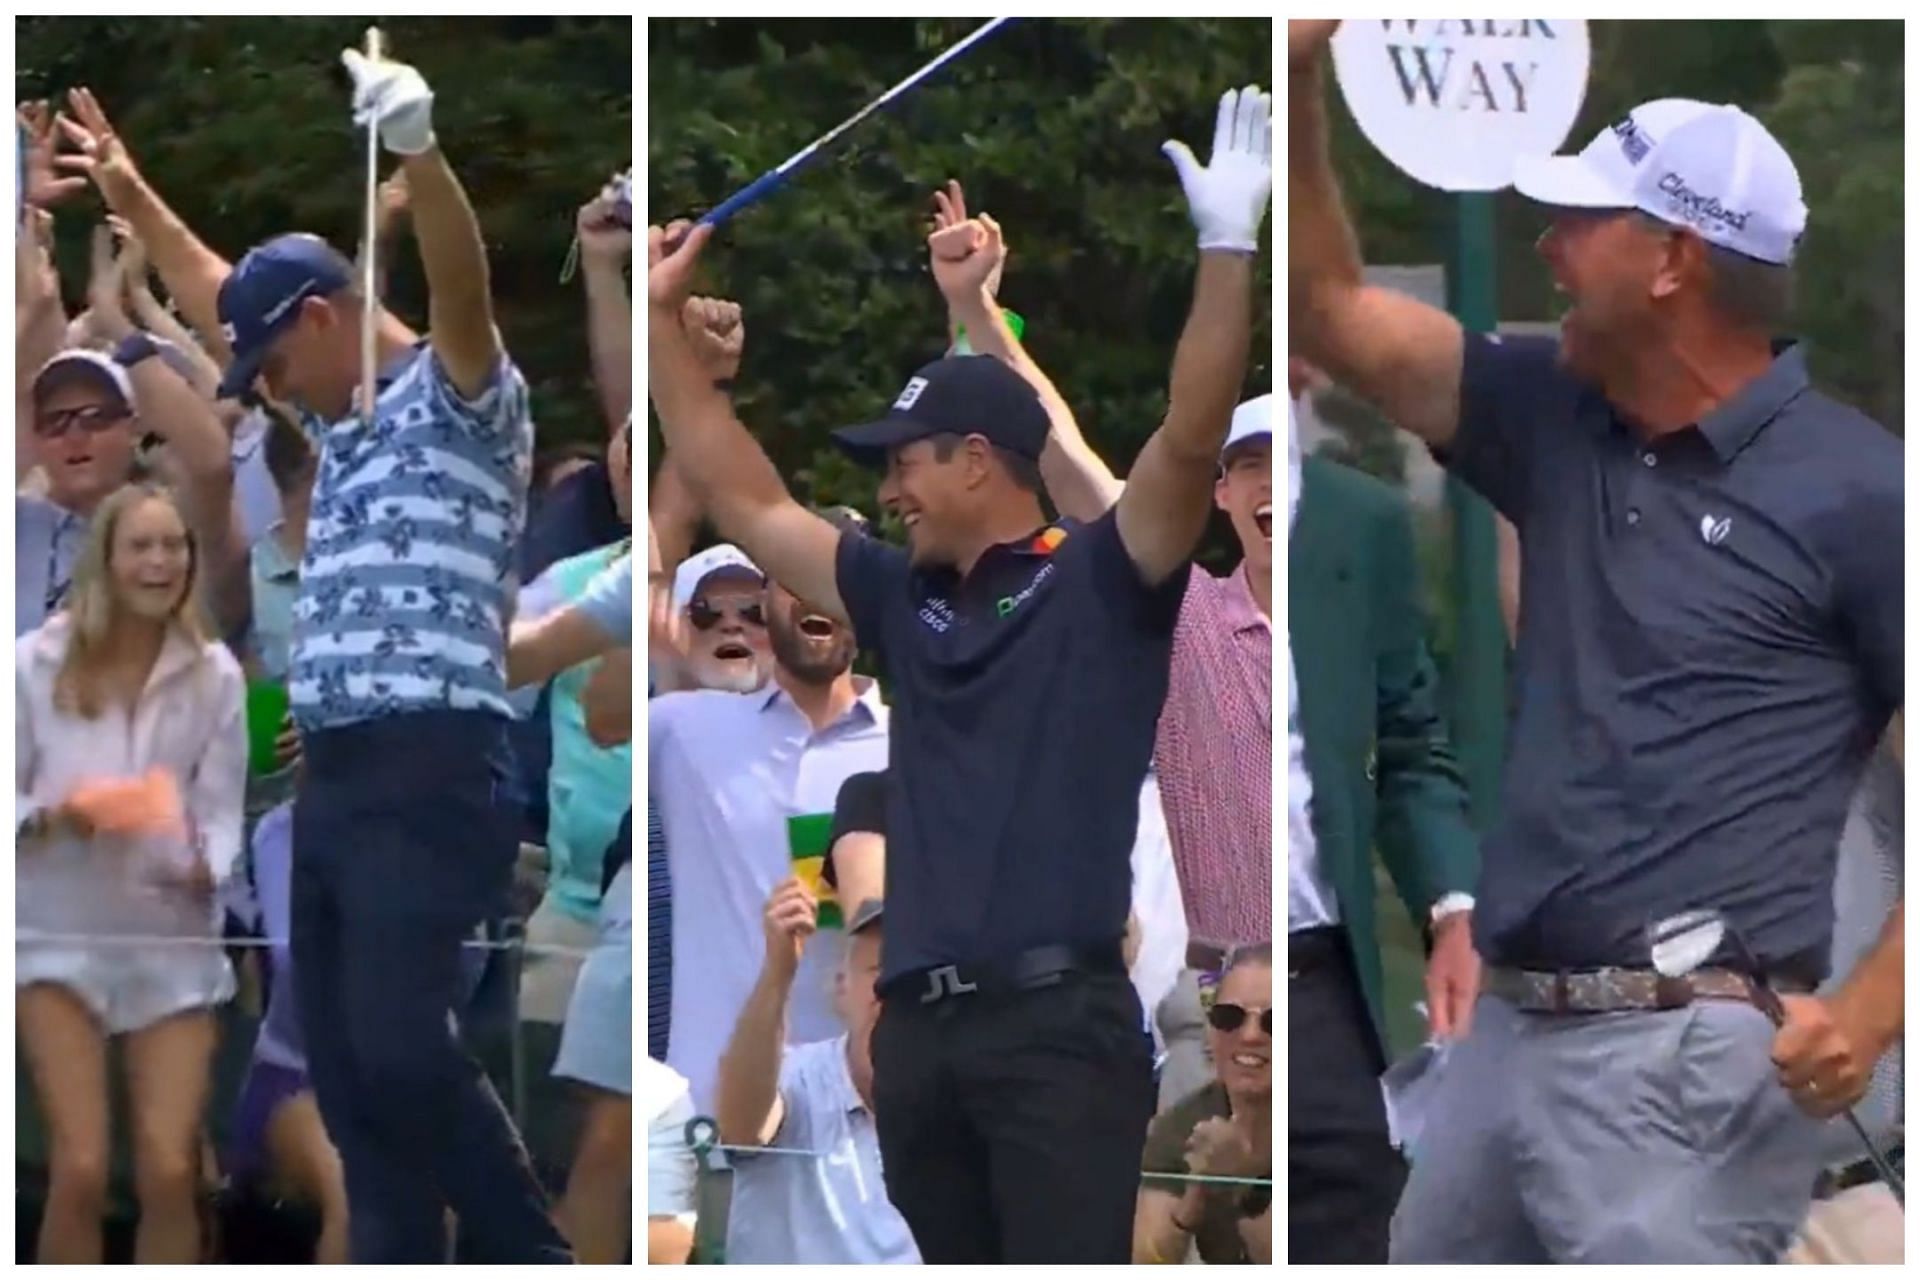 Gary Woodland, Viktor Hovland and Lucas Glover were among the golfers who made an ace during the par-3 contest at Augusta